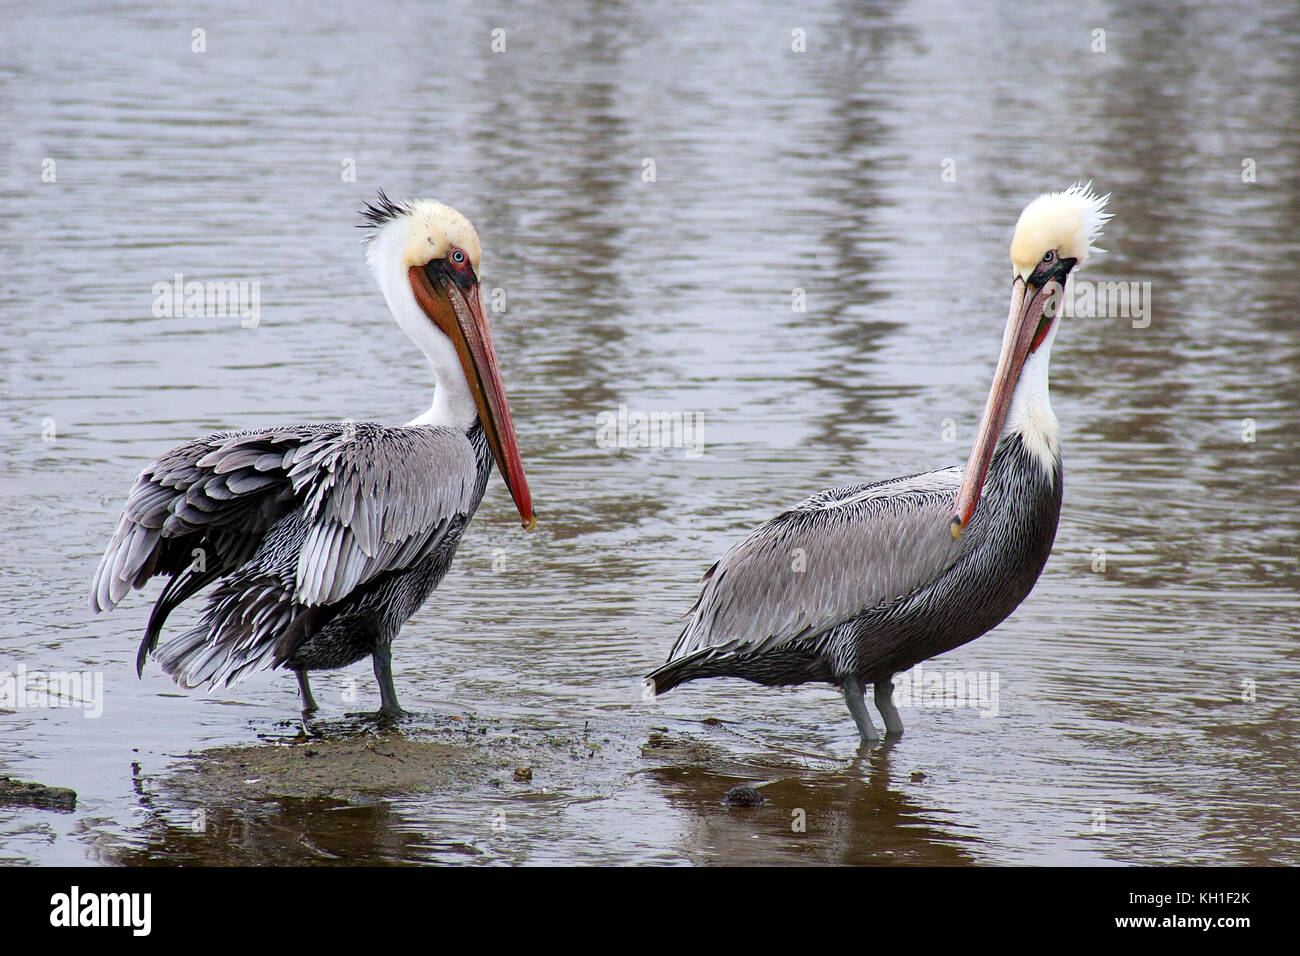 Pair of pelicans grooming themselves early in the morning Stock Photo